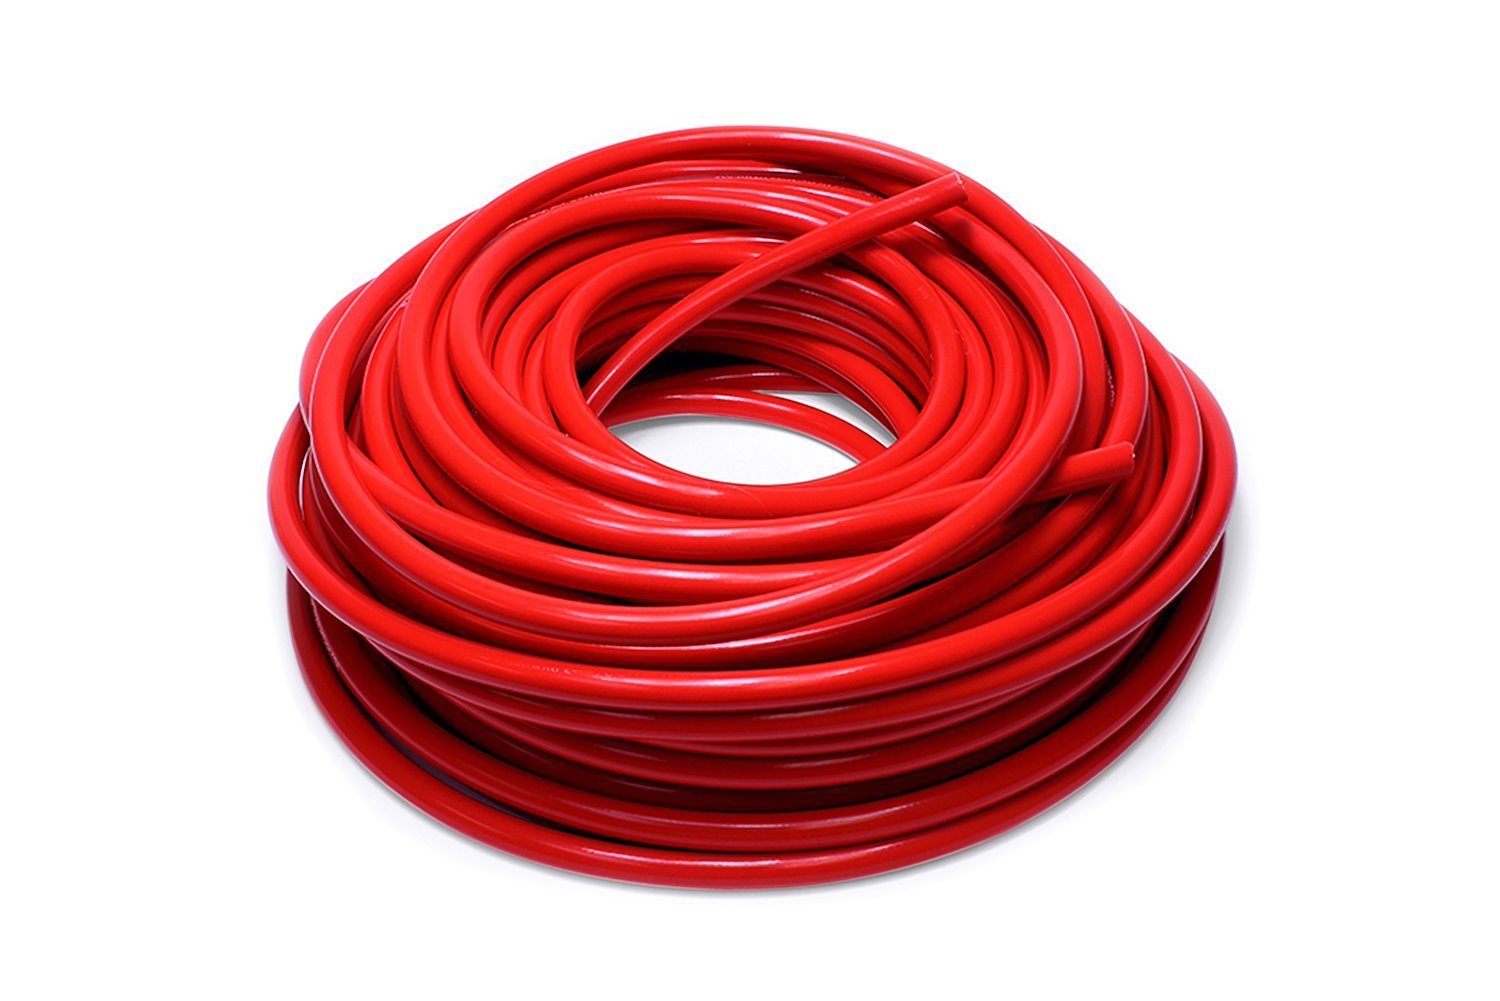 HTHH-075-REDx50 Silicone Heater Hose Tubing, High-Temp 1-Ply Reinforced, 3/4 in. ID, 50 ft. Roll, Red